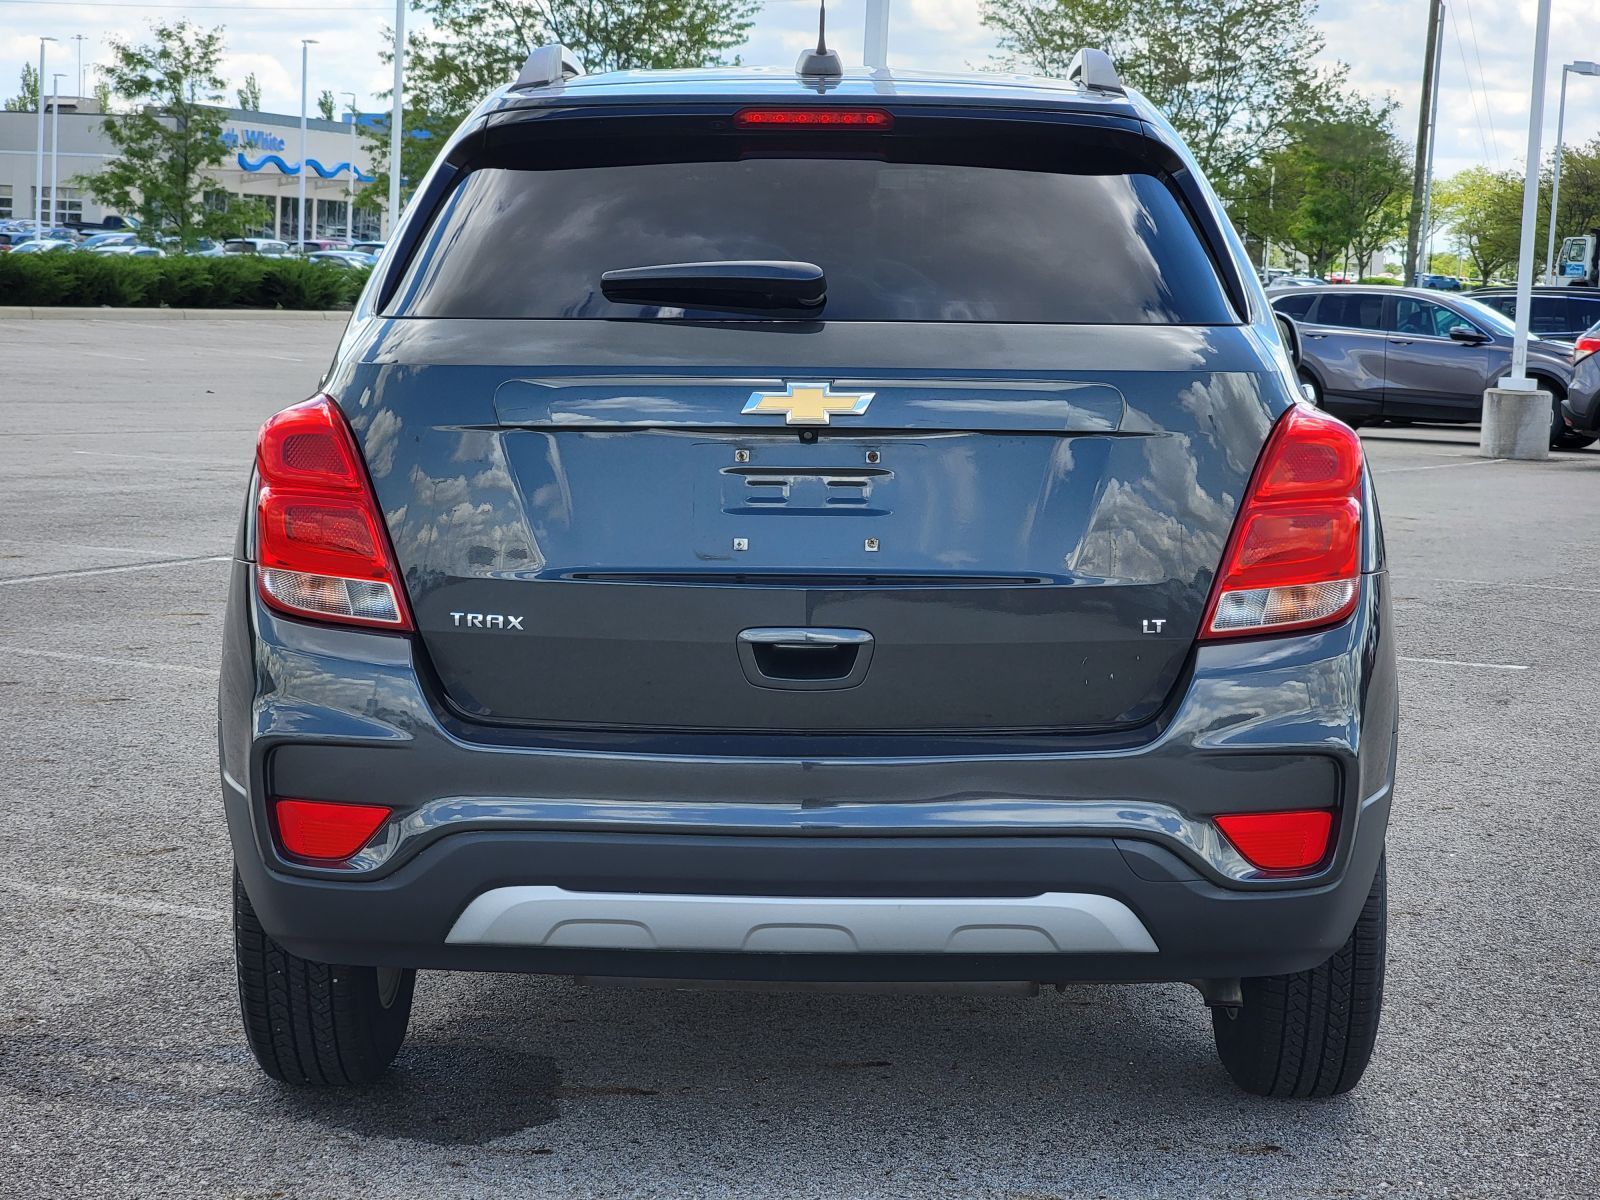 Used, 2019 Chevrolet Trax LT, Gray, G0449A-10